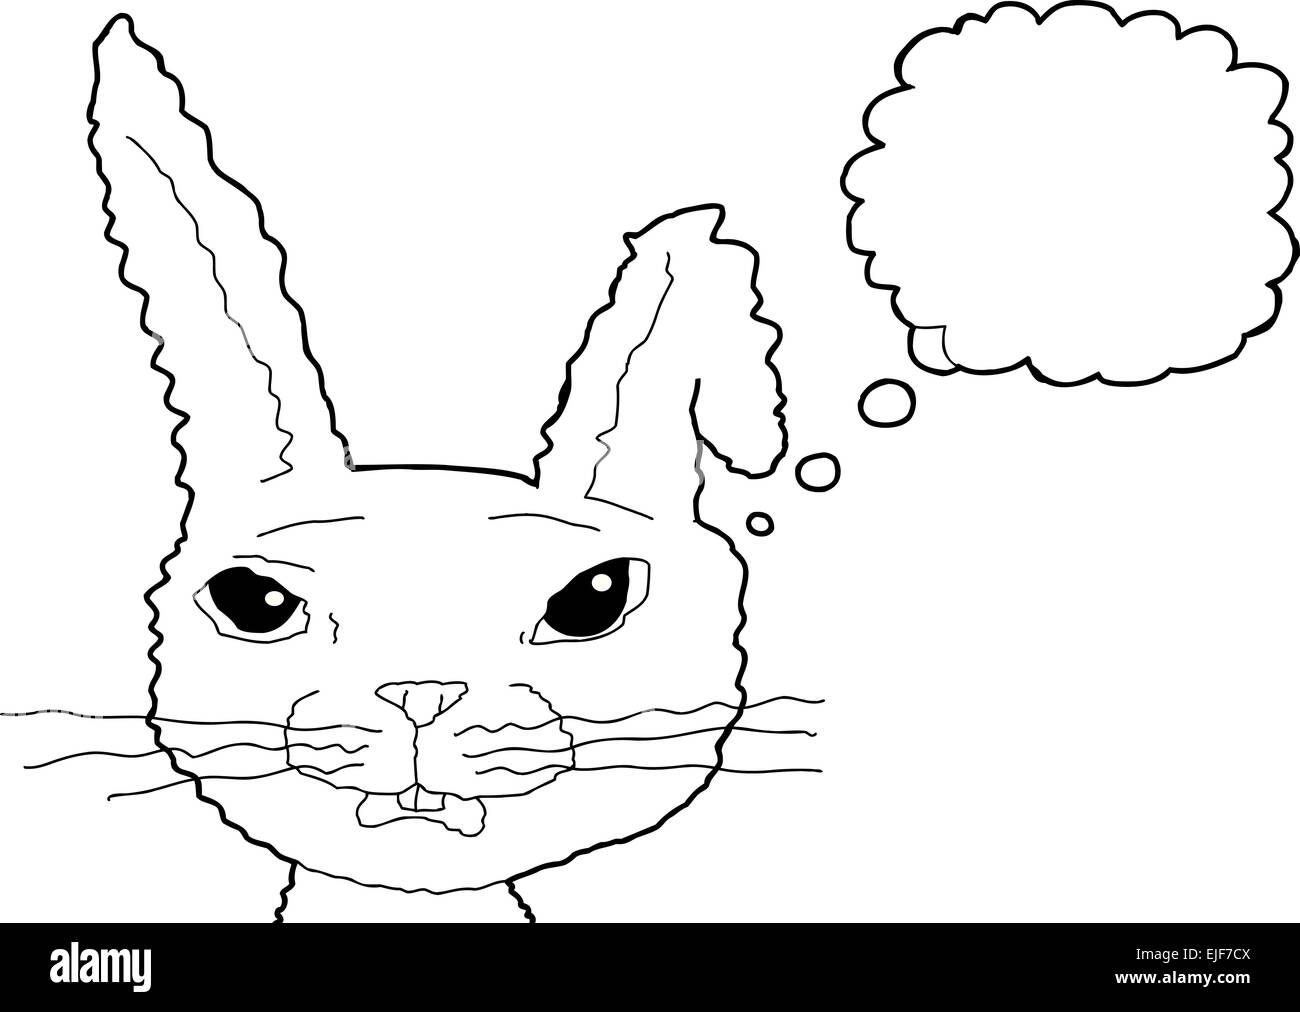 Outlined fuzzy cartoon rabbit with thought bubble Stock Photo